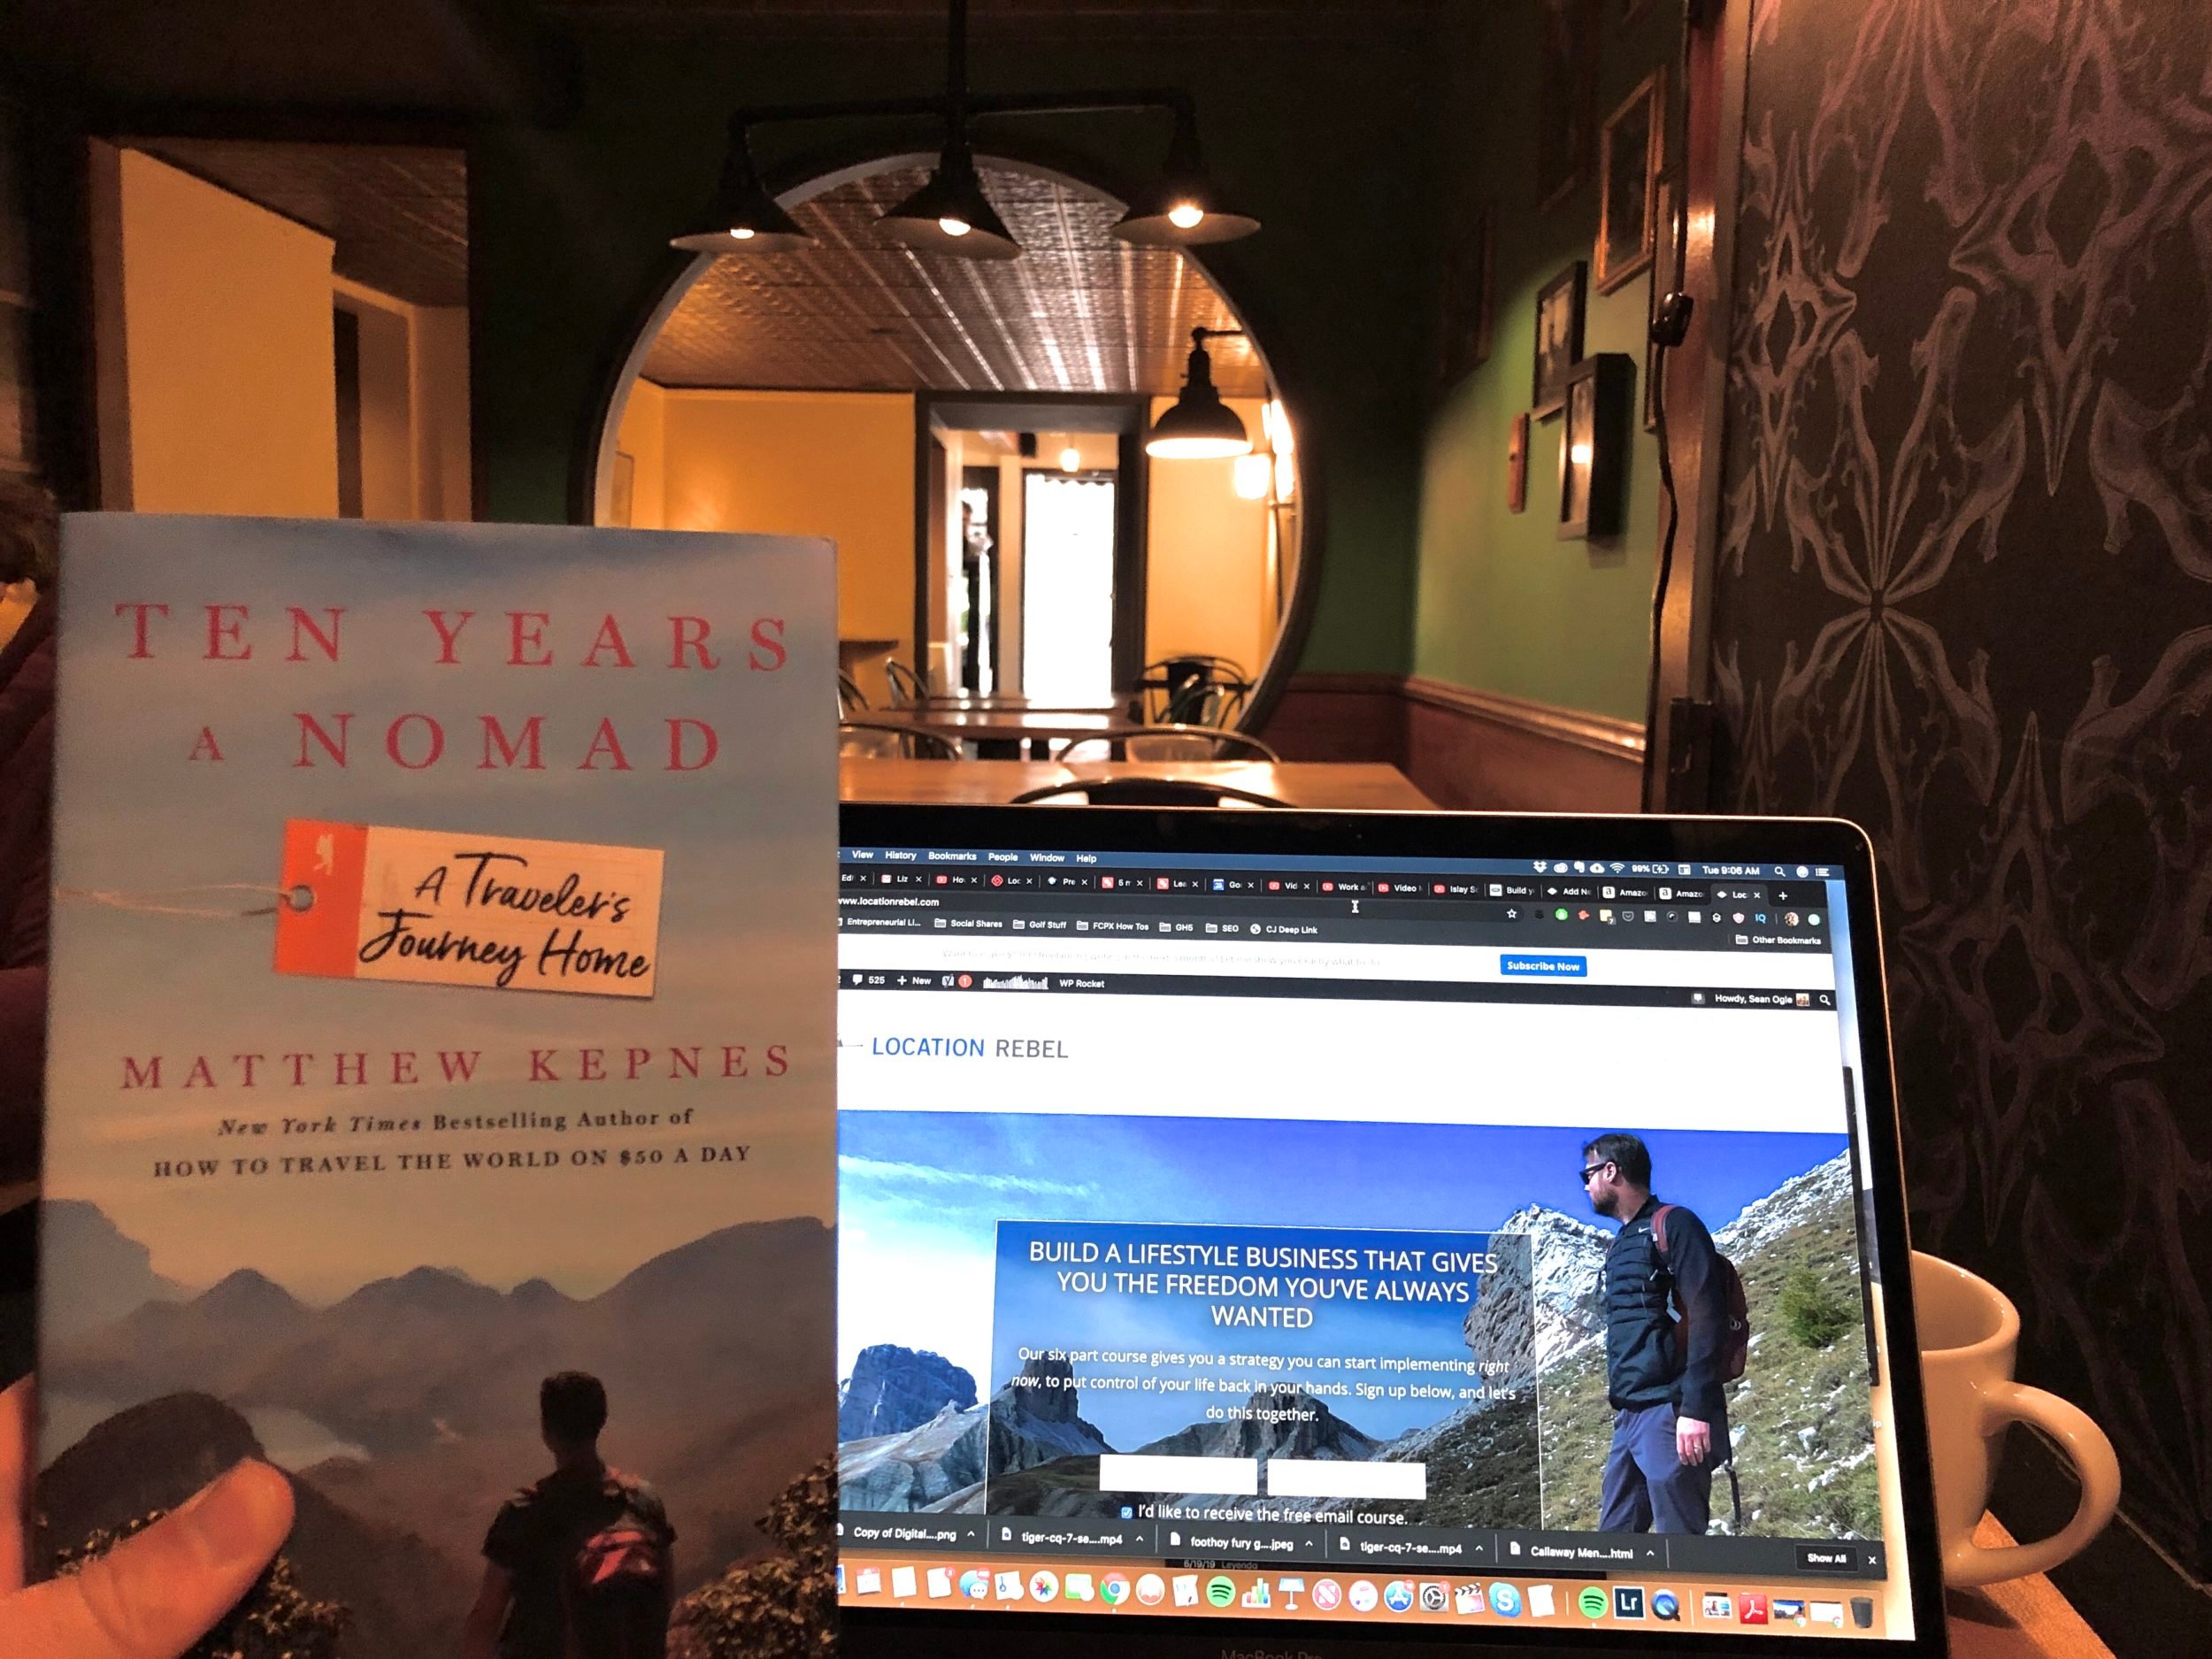 10 Years a Nomad Review: The Best Travel Book of 2019